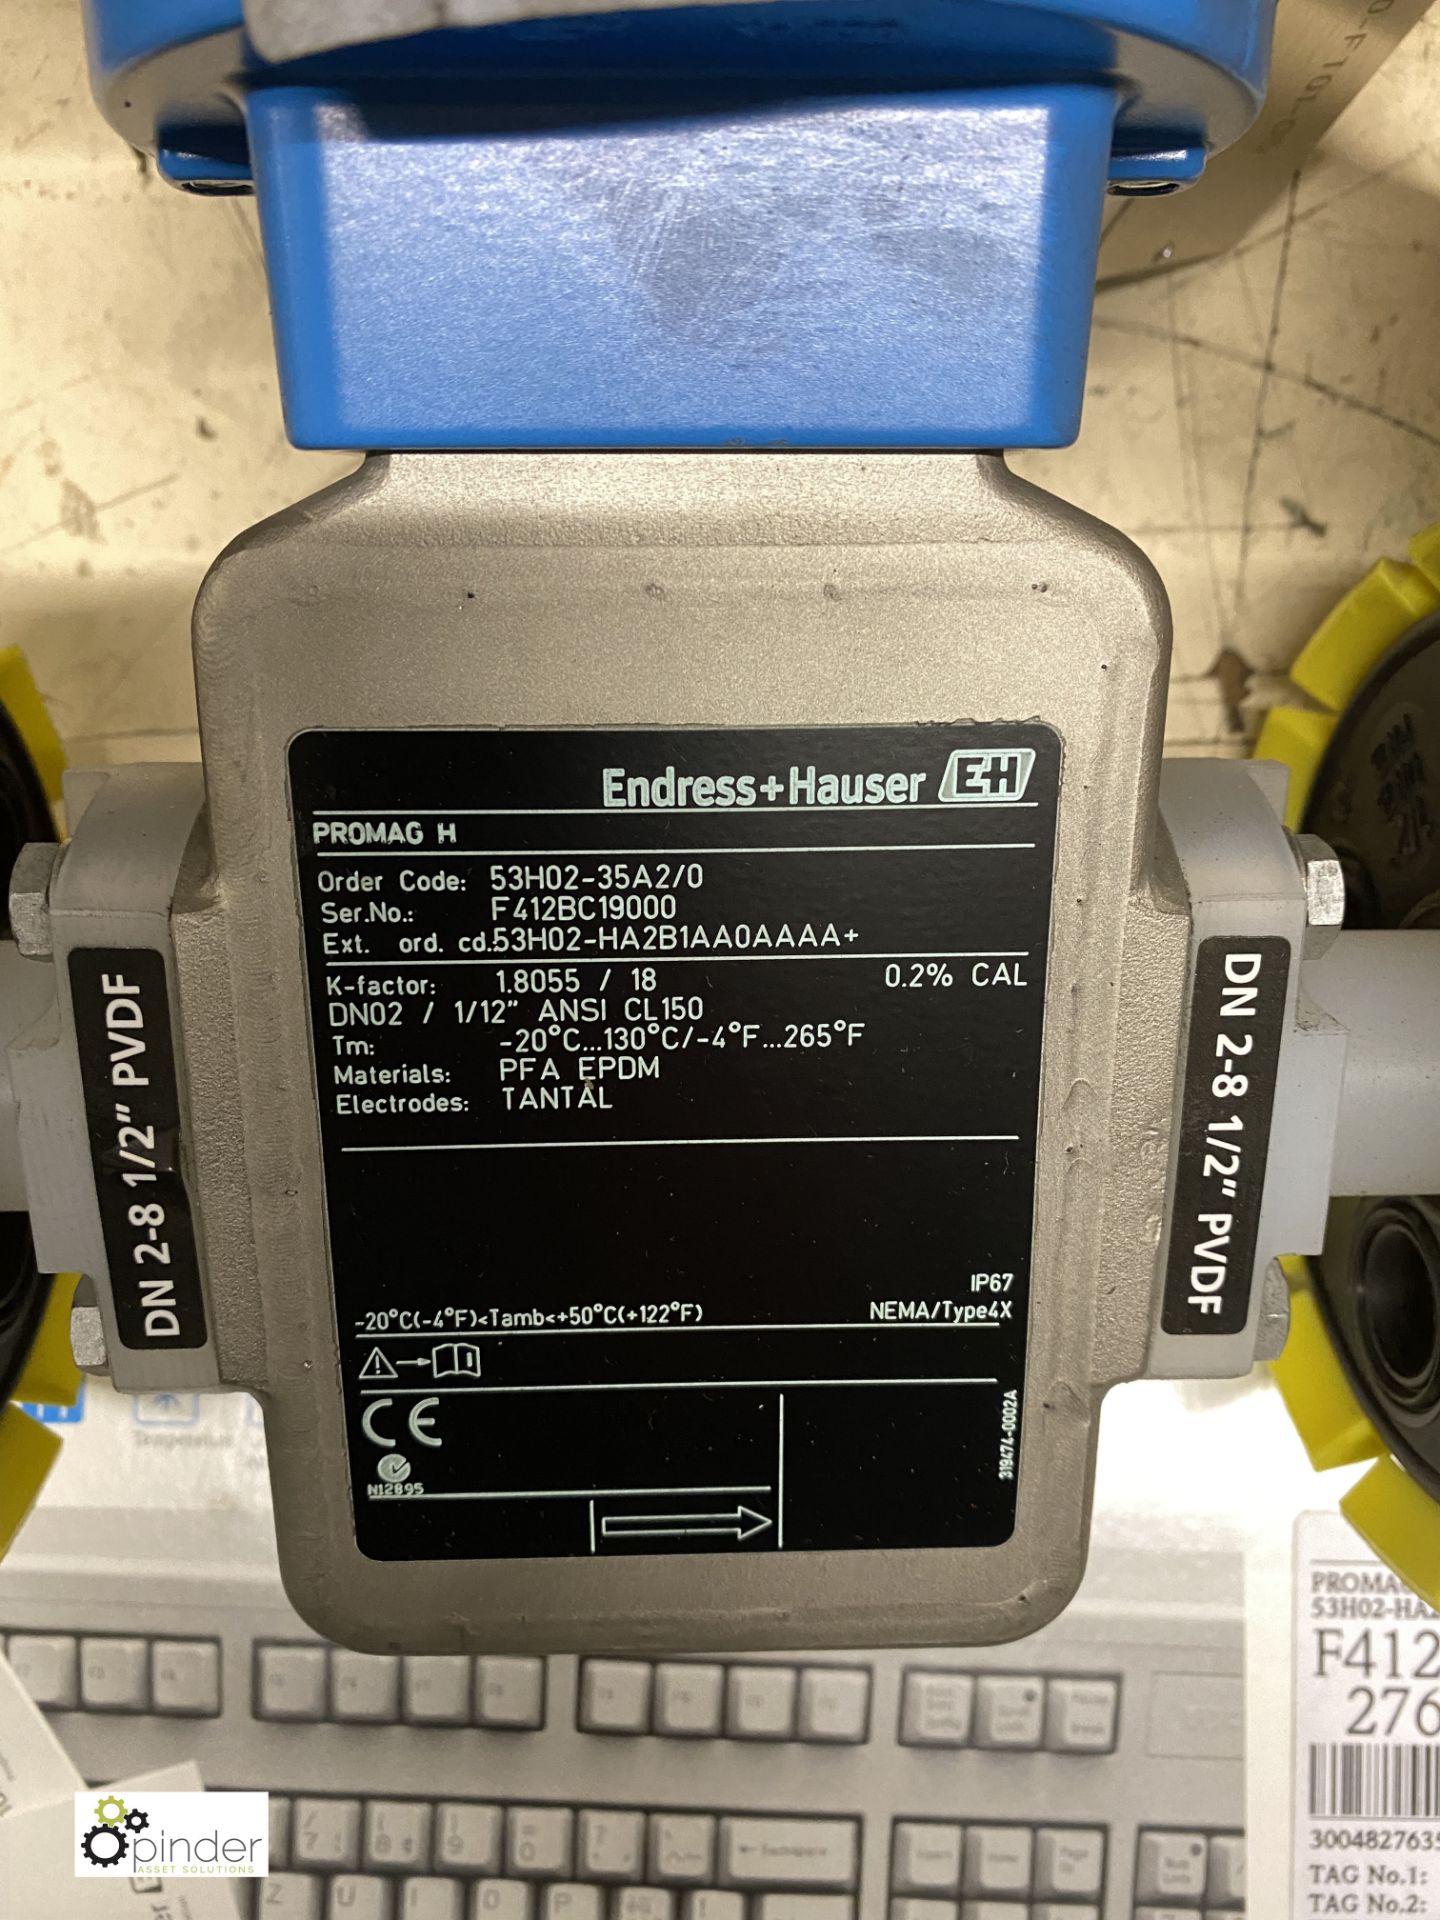 Endress & Hauser Promag H53 53H02-35A2/0, 53H02-HA - Image 2 of 5